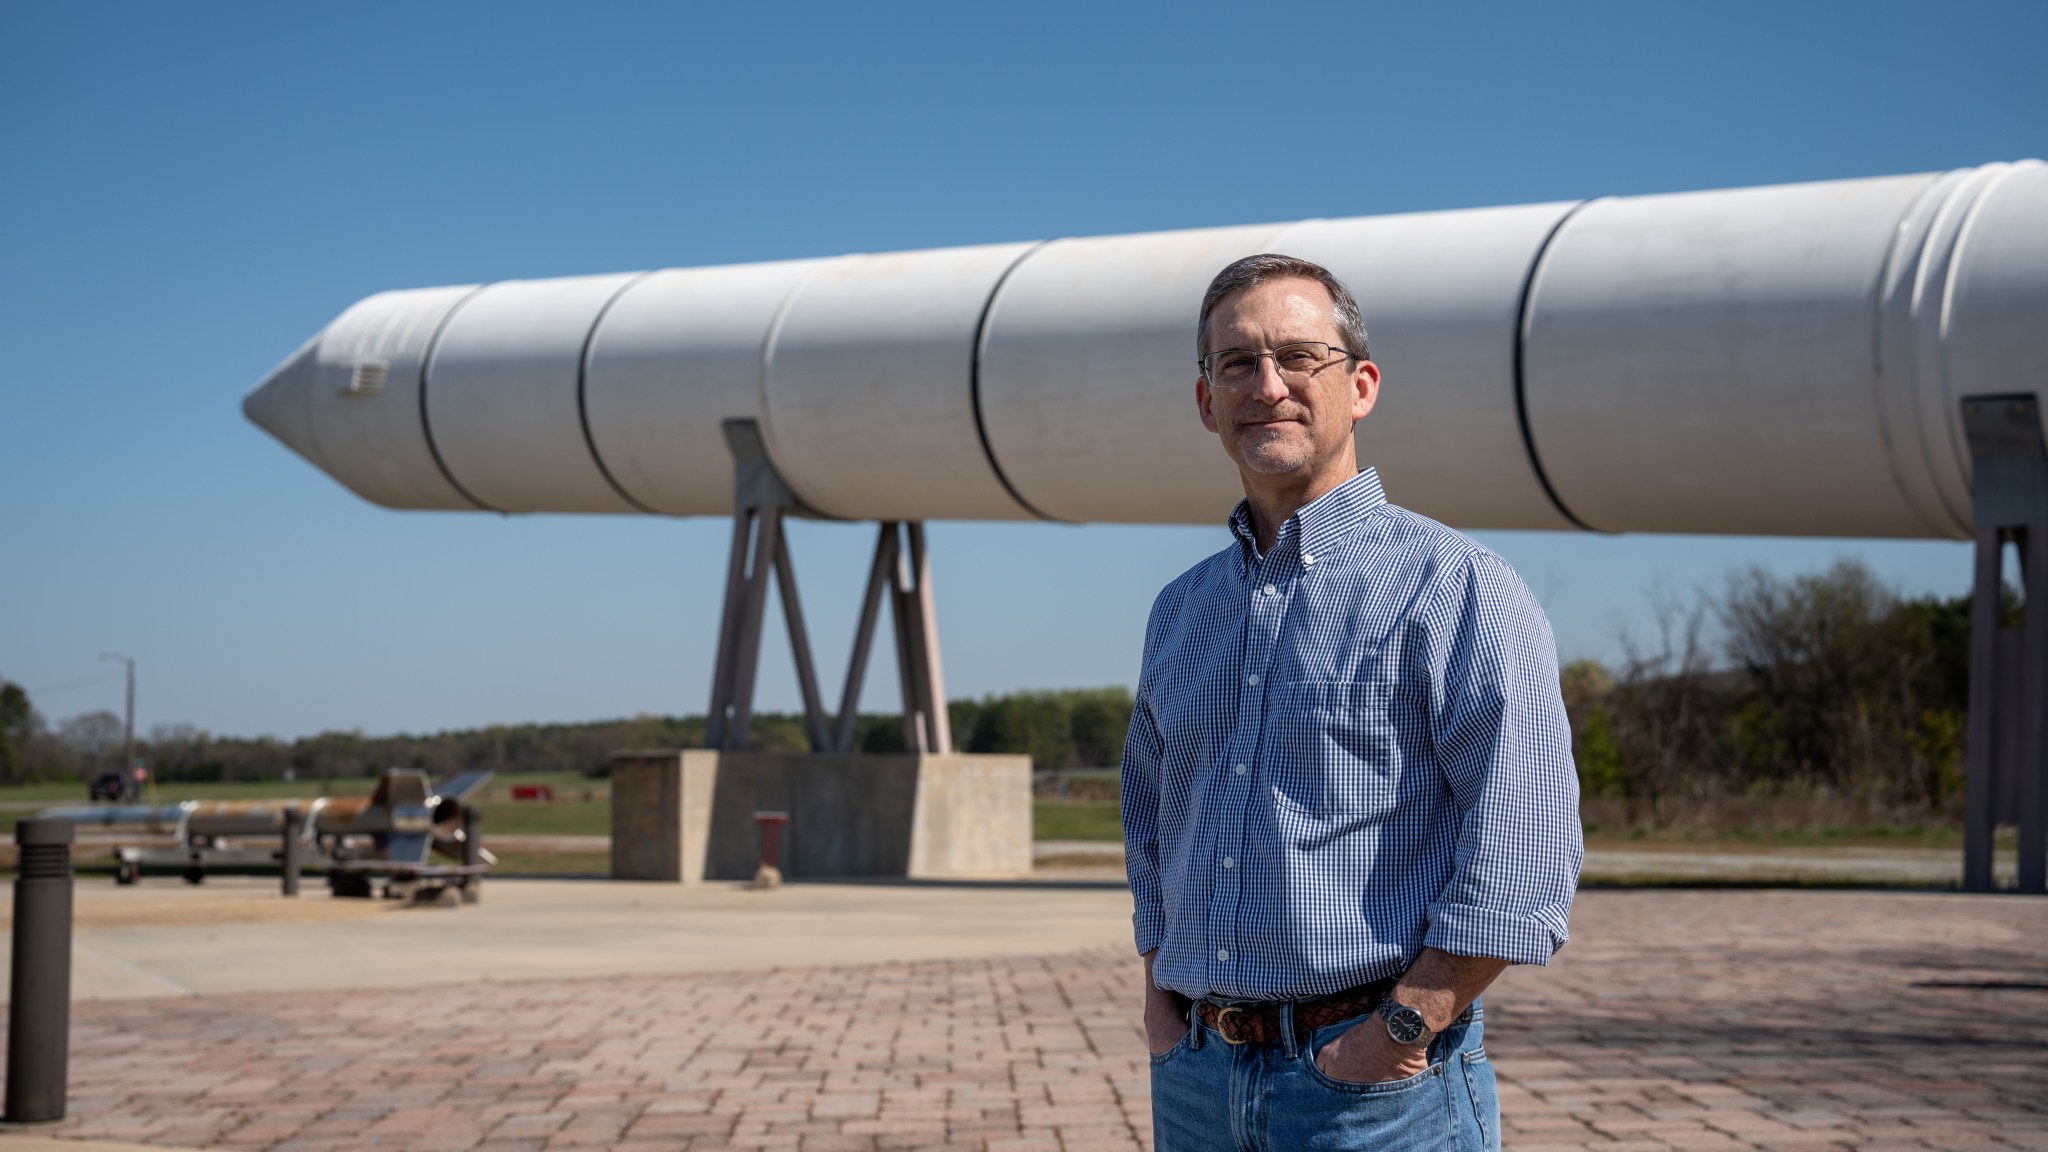 Mat Bevill, the associate chief engineer for NASA's SLS (Space Launch System) Program, plays a crucial role in the development and flight of the SLS mega rocket. His NASA journey started as an intern, led him to have hands-on experience with solid rocket boosters, and landed him in the position of supporting the SLS Chief Engineer's Office.